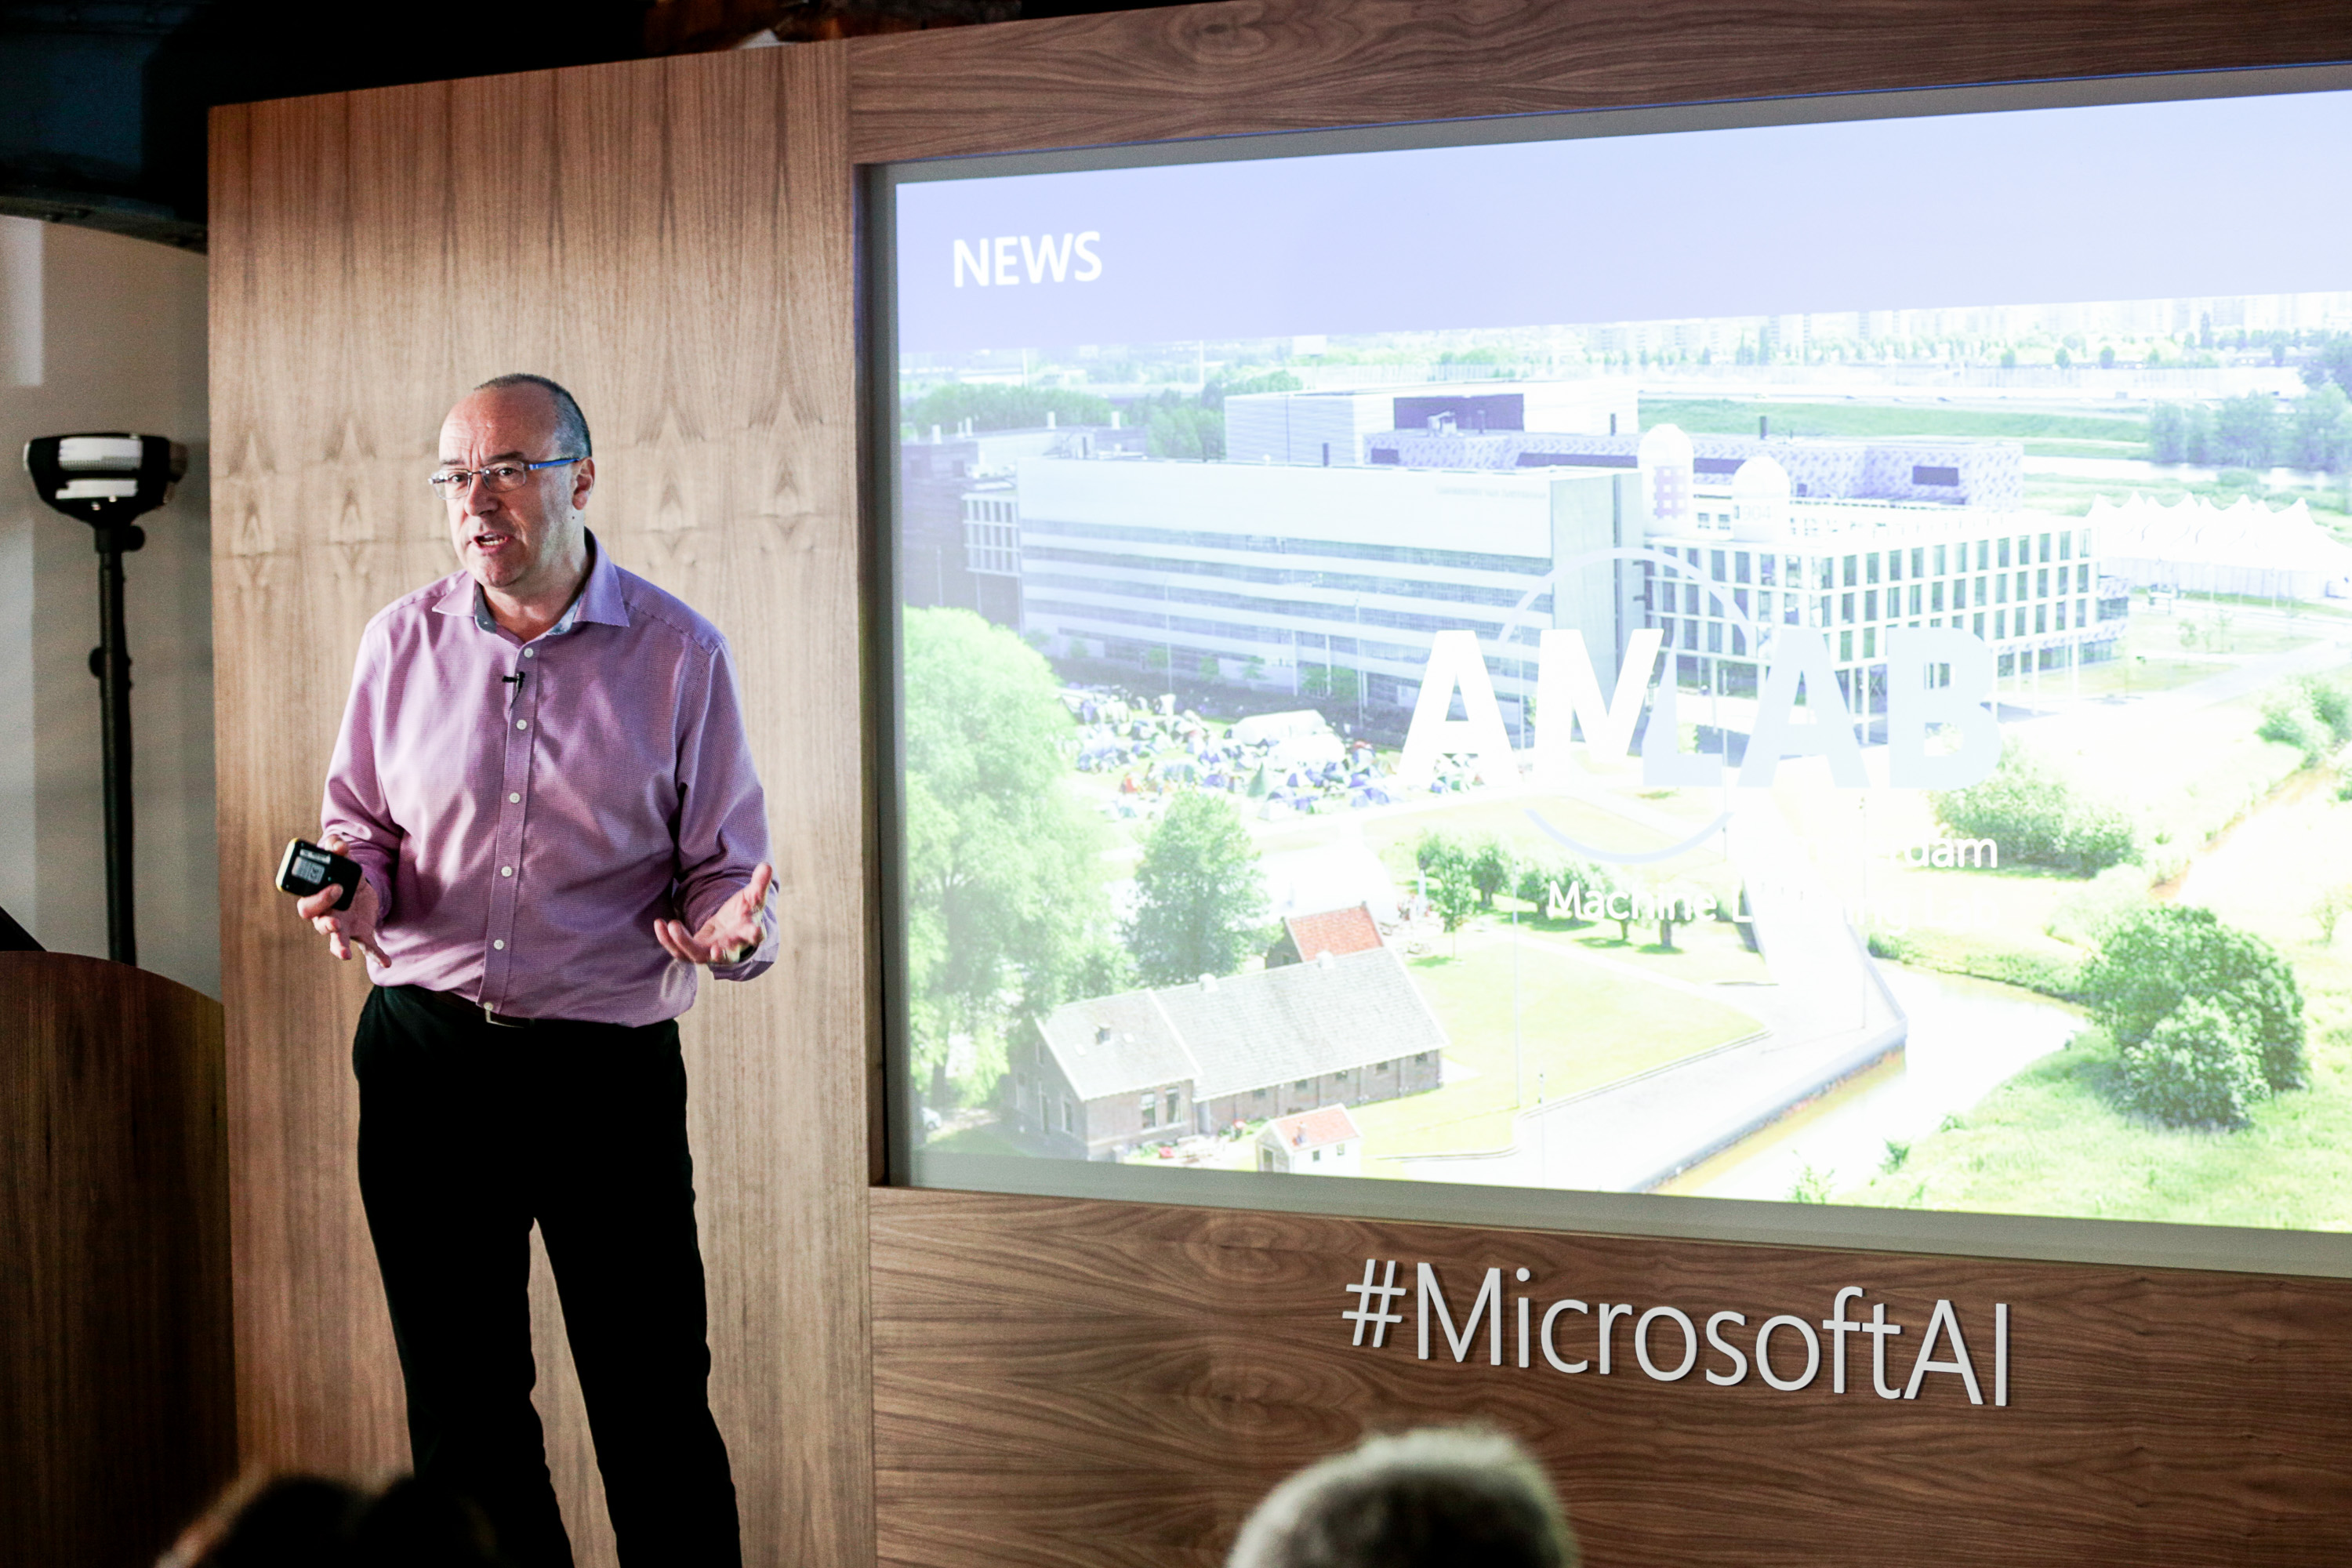 Chris Bishop, Laboratory Director, Microsoft Research Cambridge and Technical Fellow